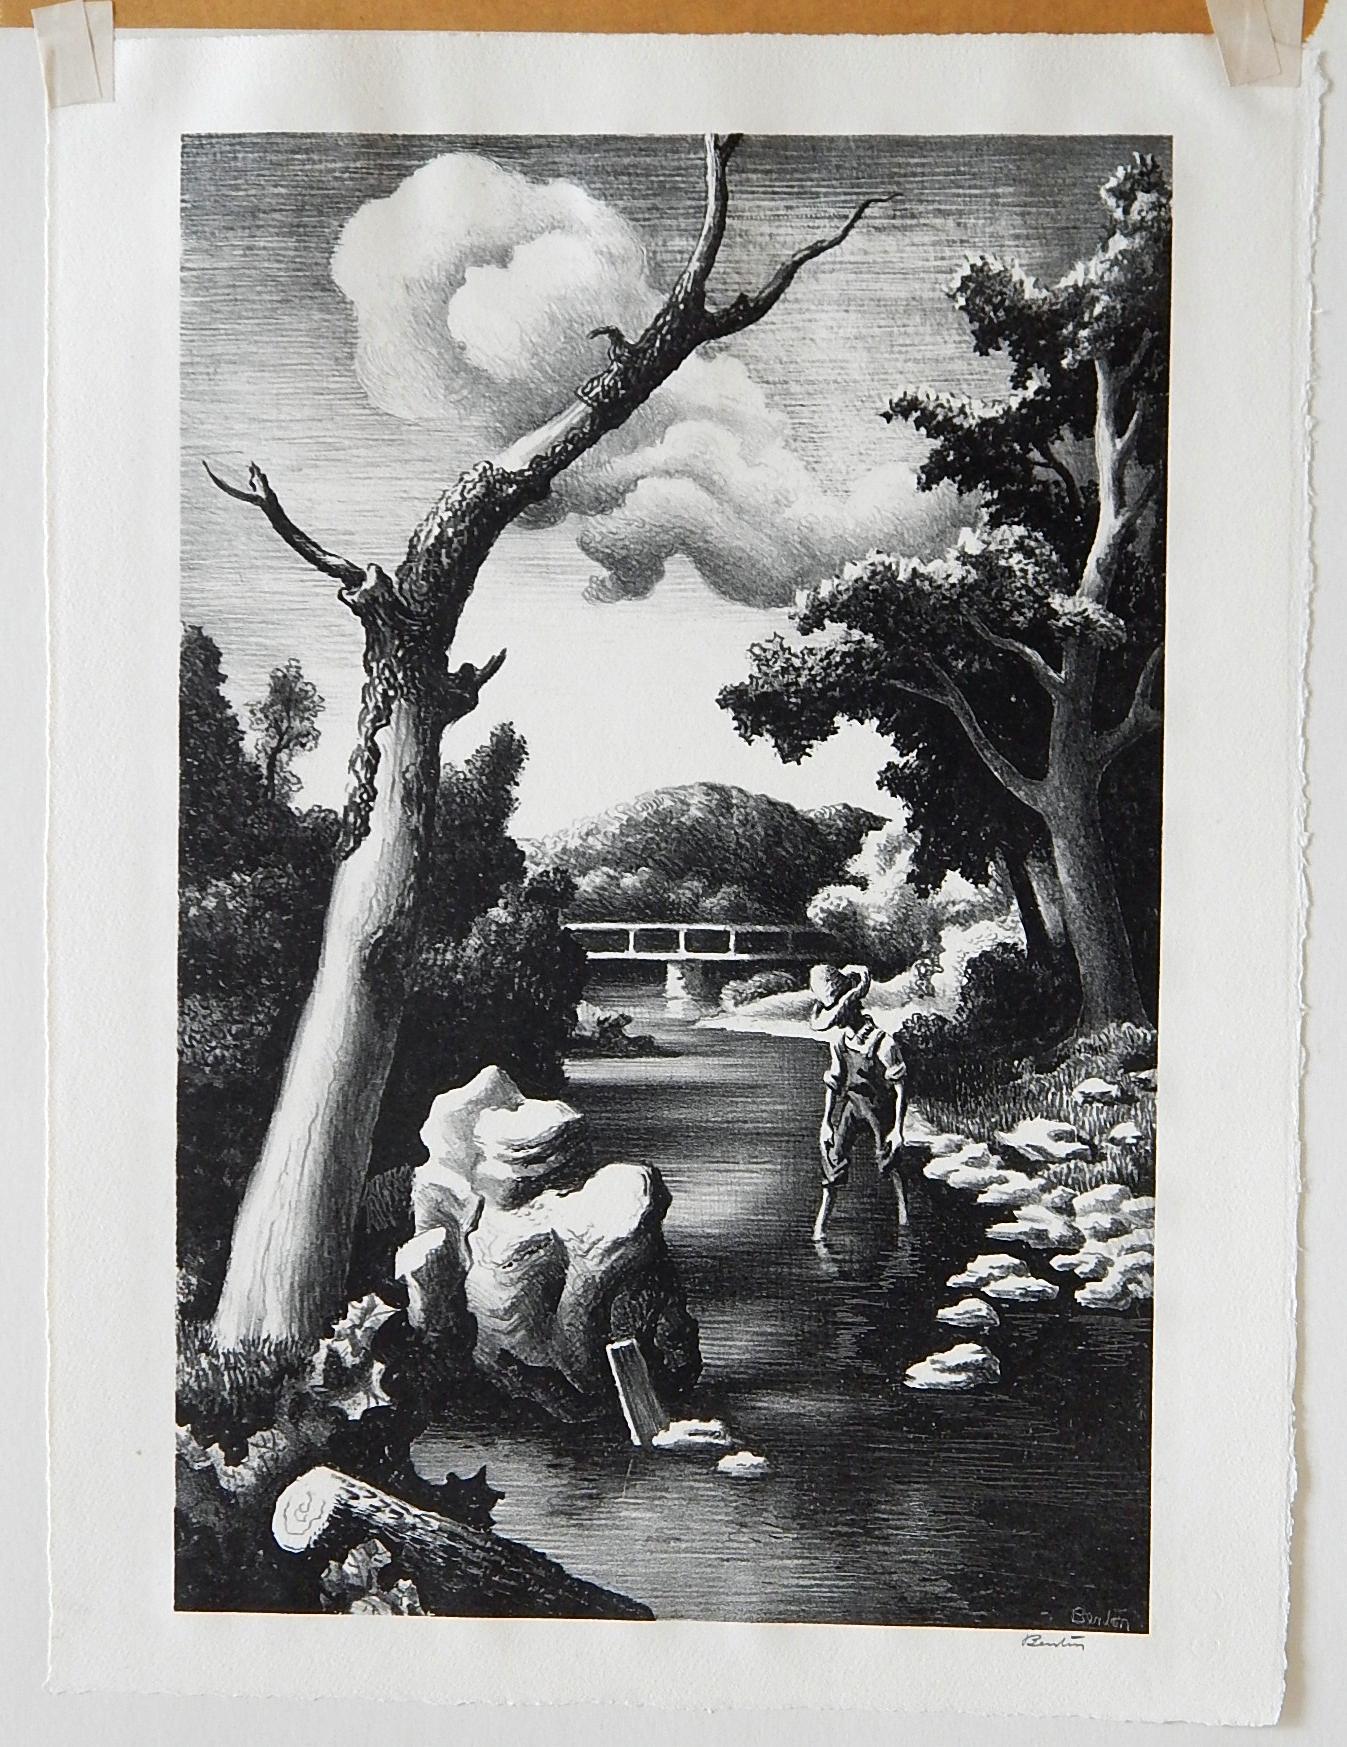 An original stone lithograph in excellent condition by well known Regionalist Thomas Hart Benton (1889-1975).
Titled: 